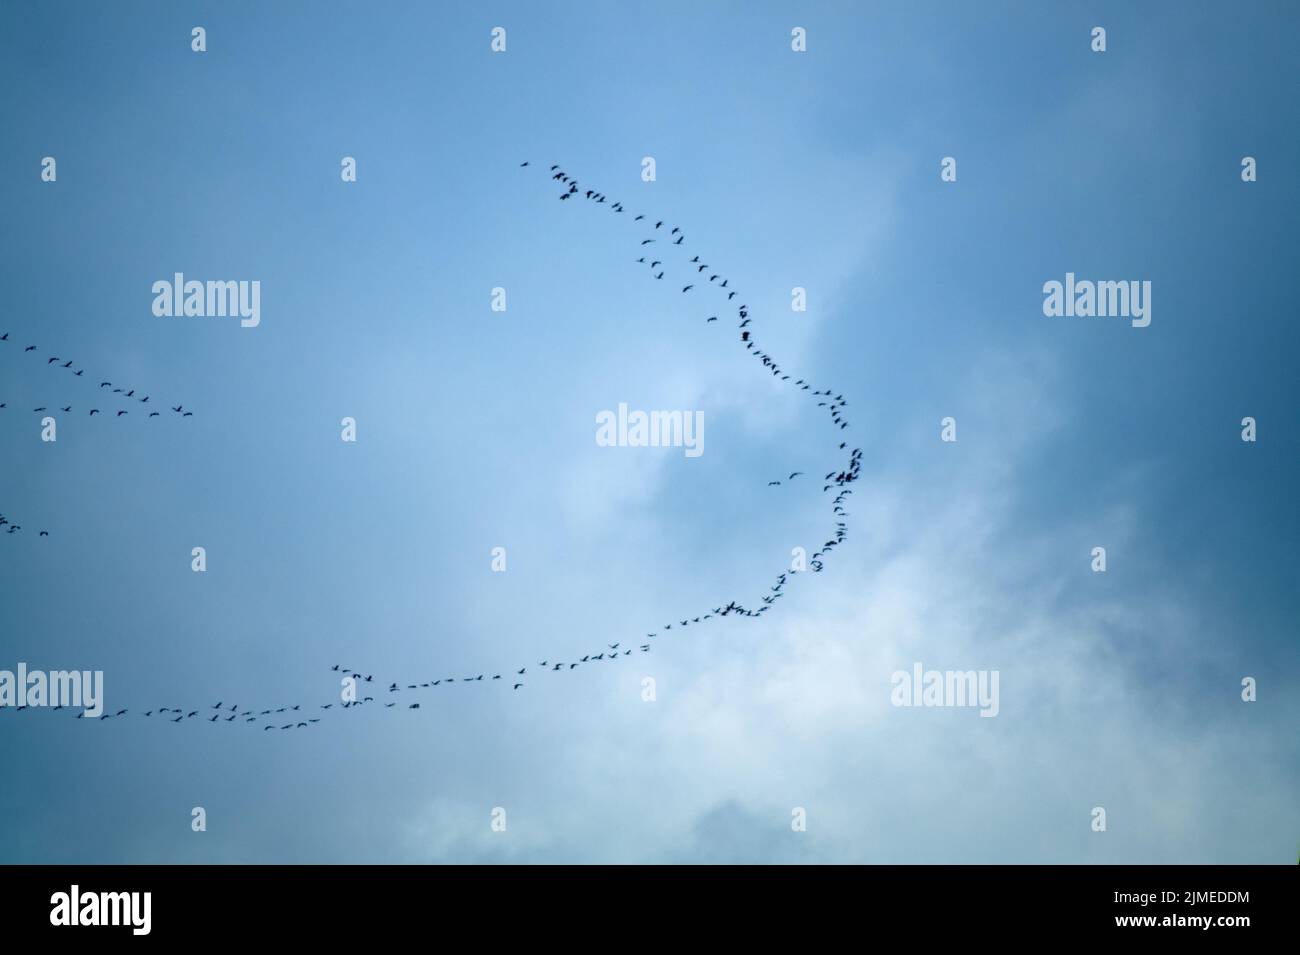 silhouettes of wild geese flying in front of misty blue sky. Stock Photo